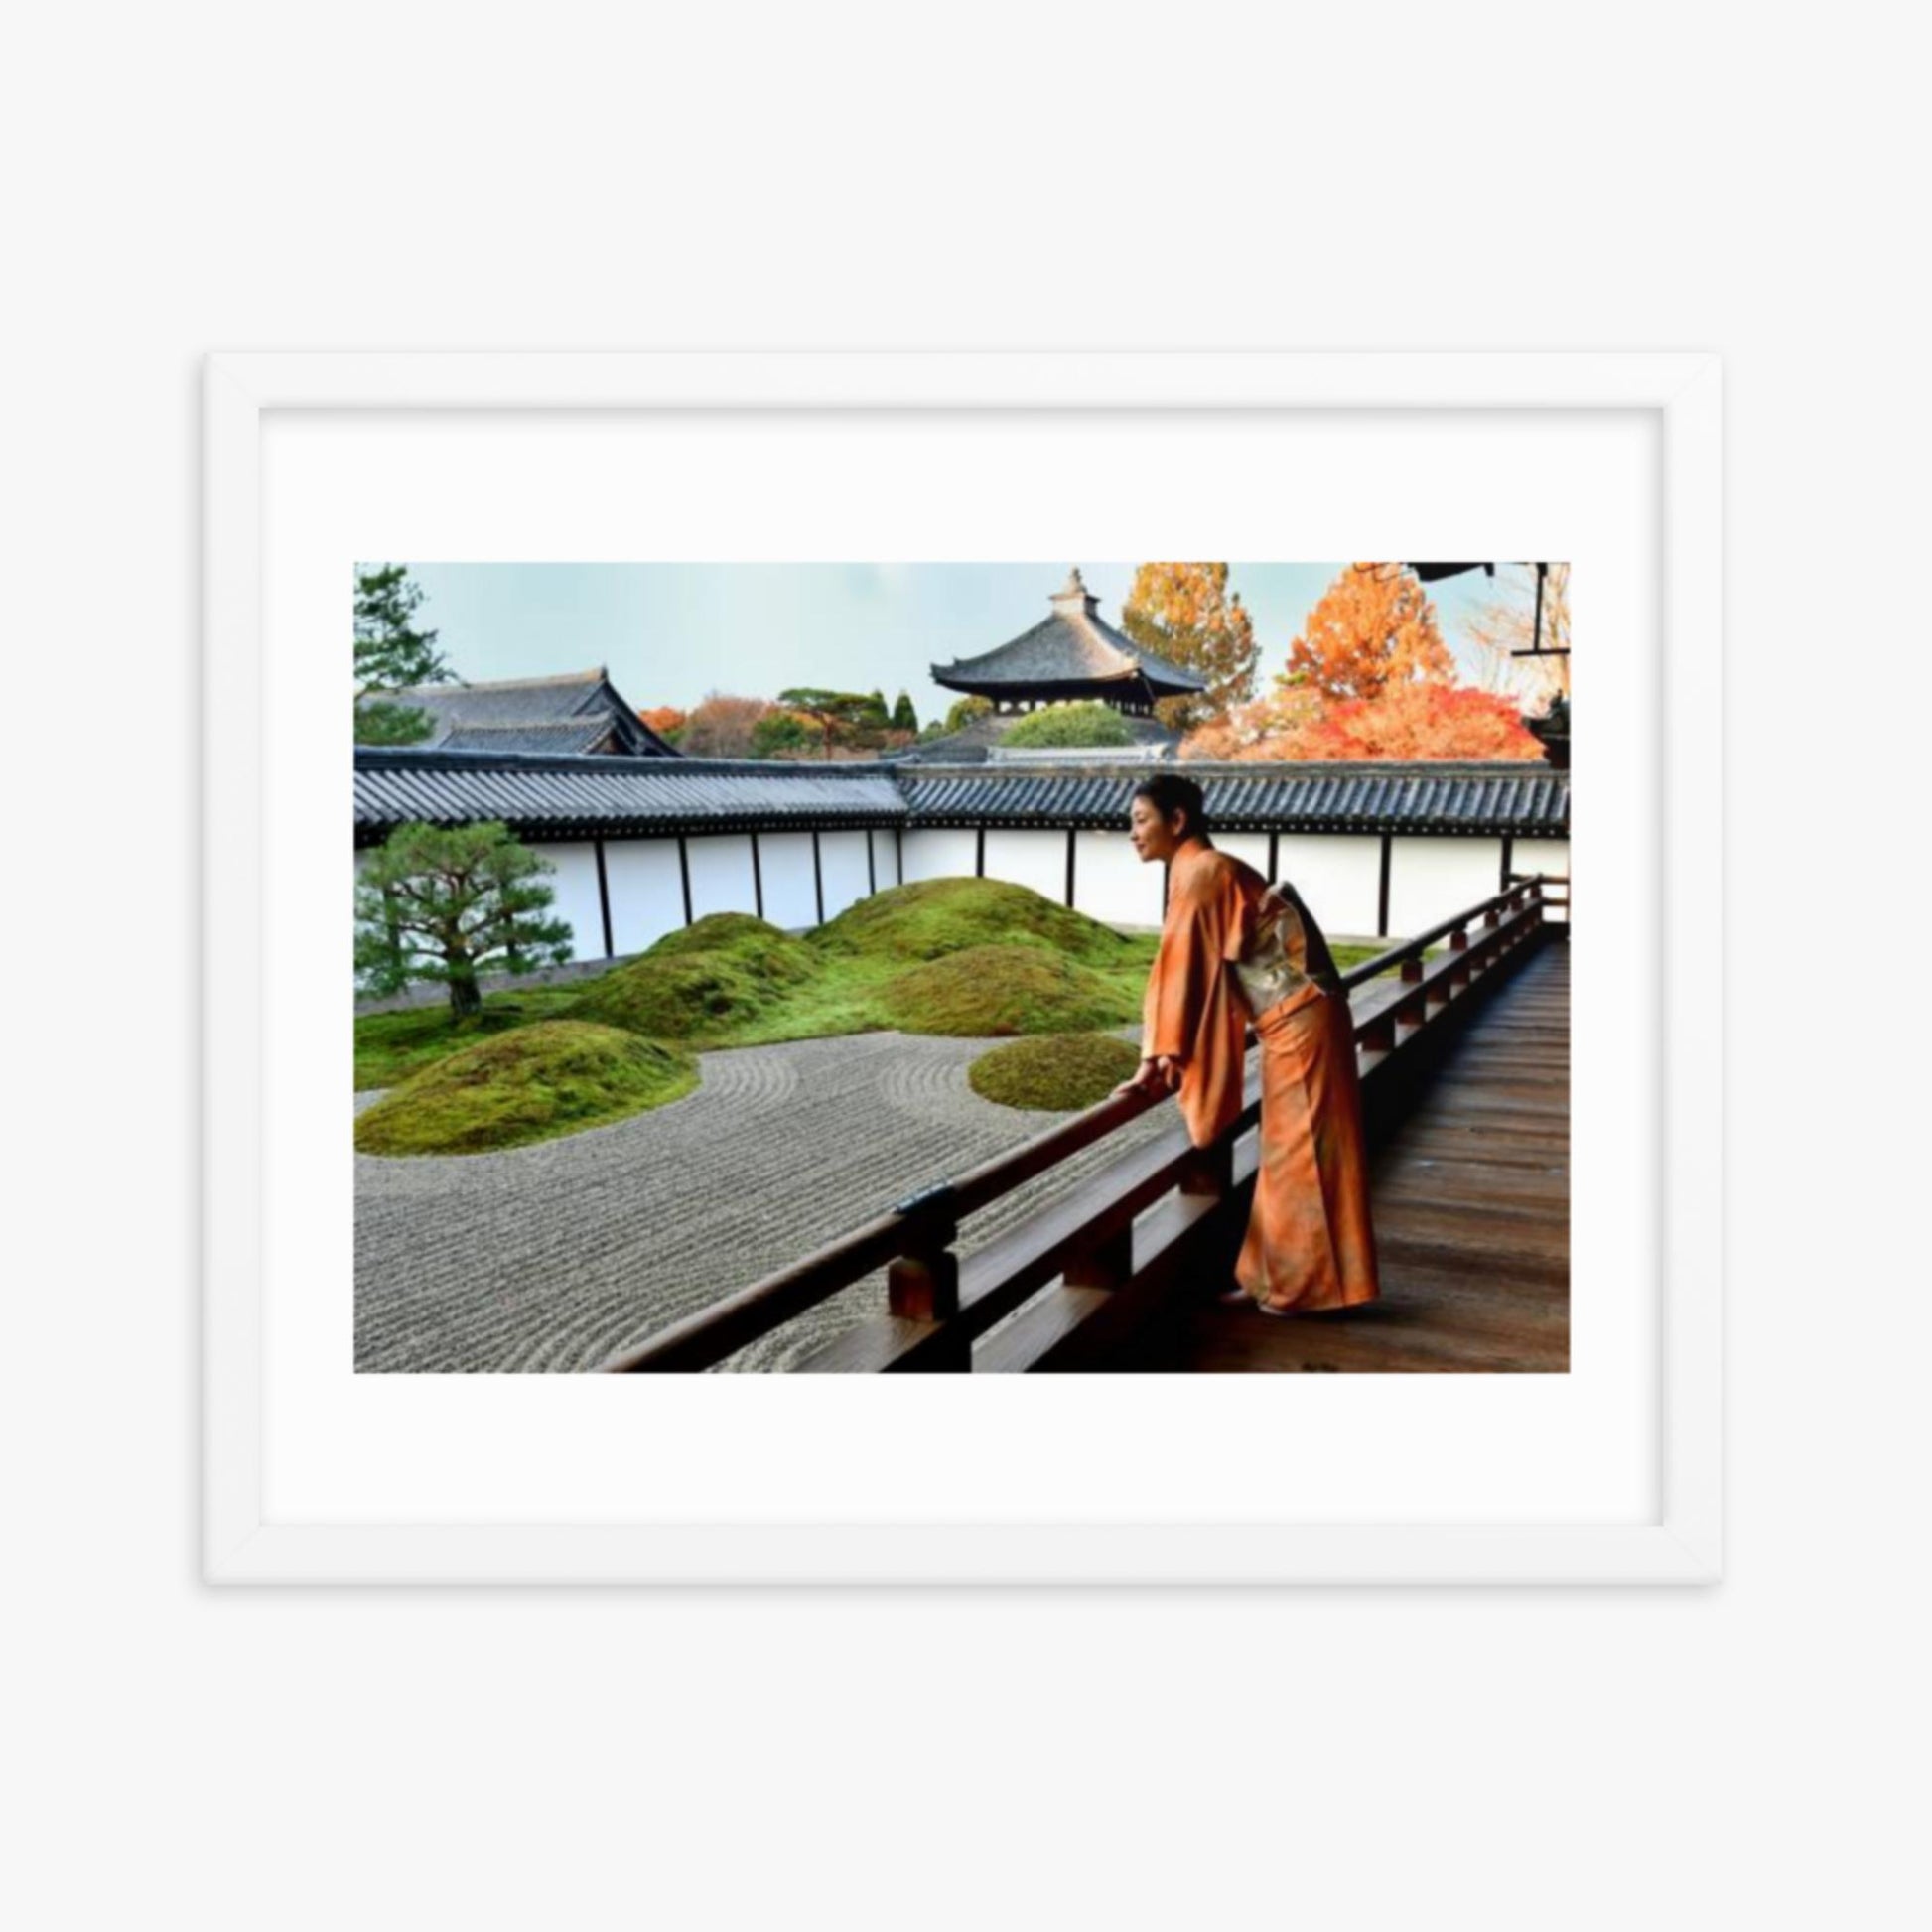 Japanese Woman in Kimono Appreciating Japanese Garden at Tofukuji, Kyoto 16x20 in Poster With White Frame